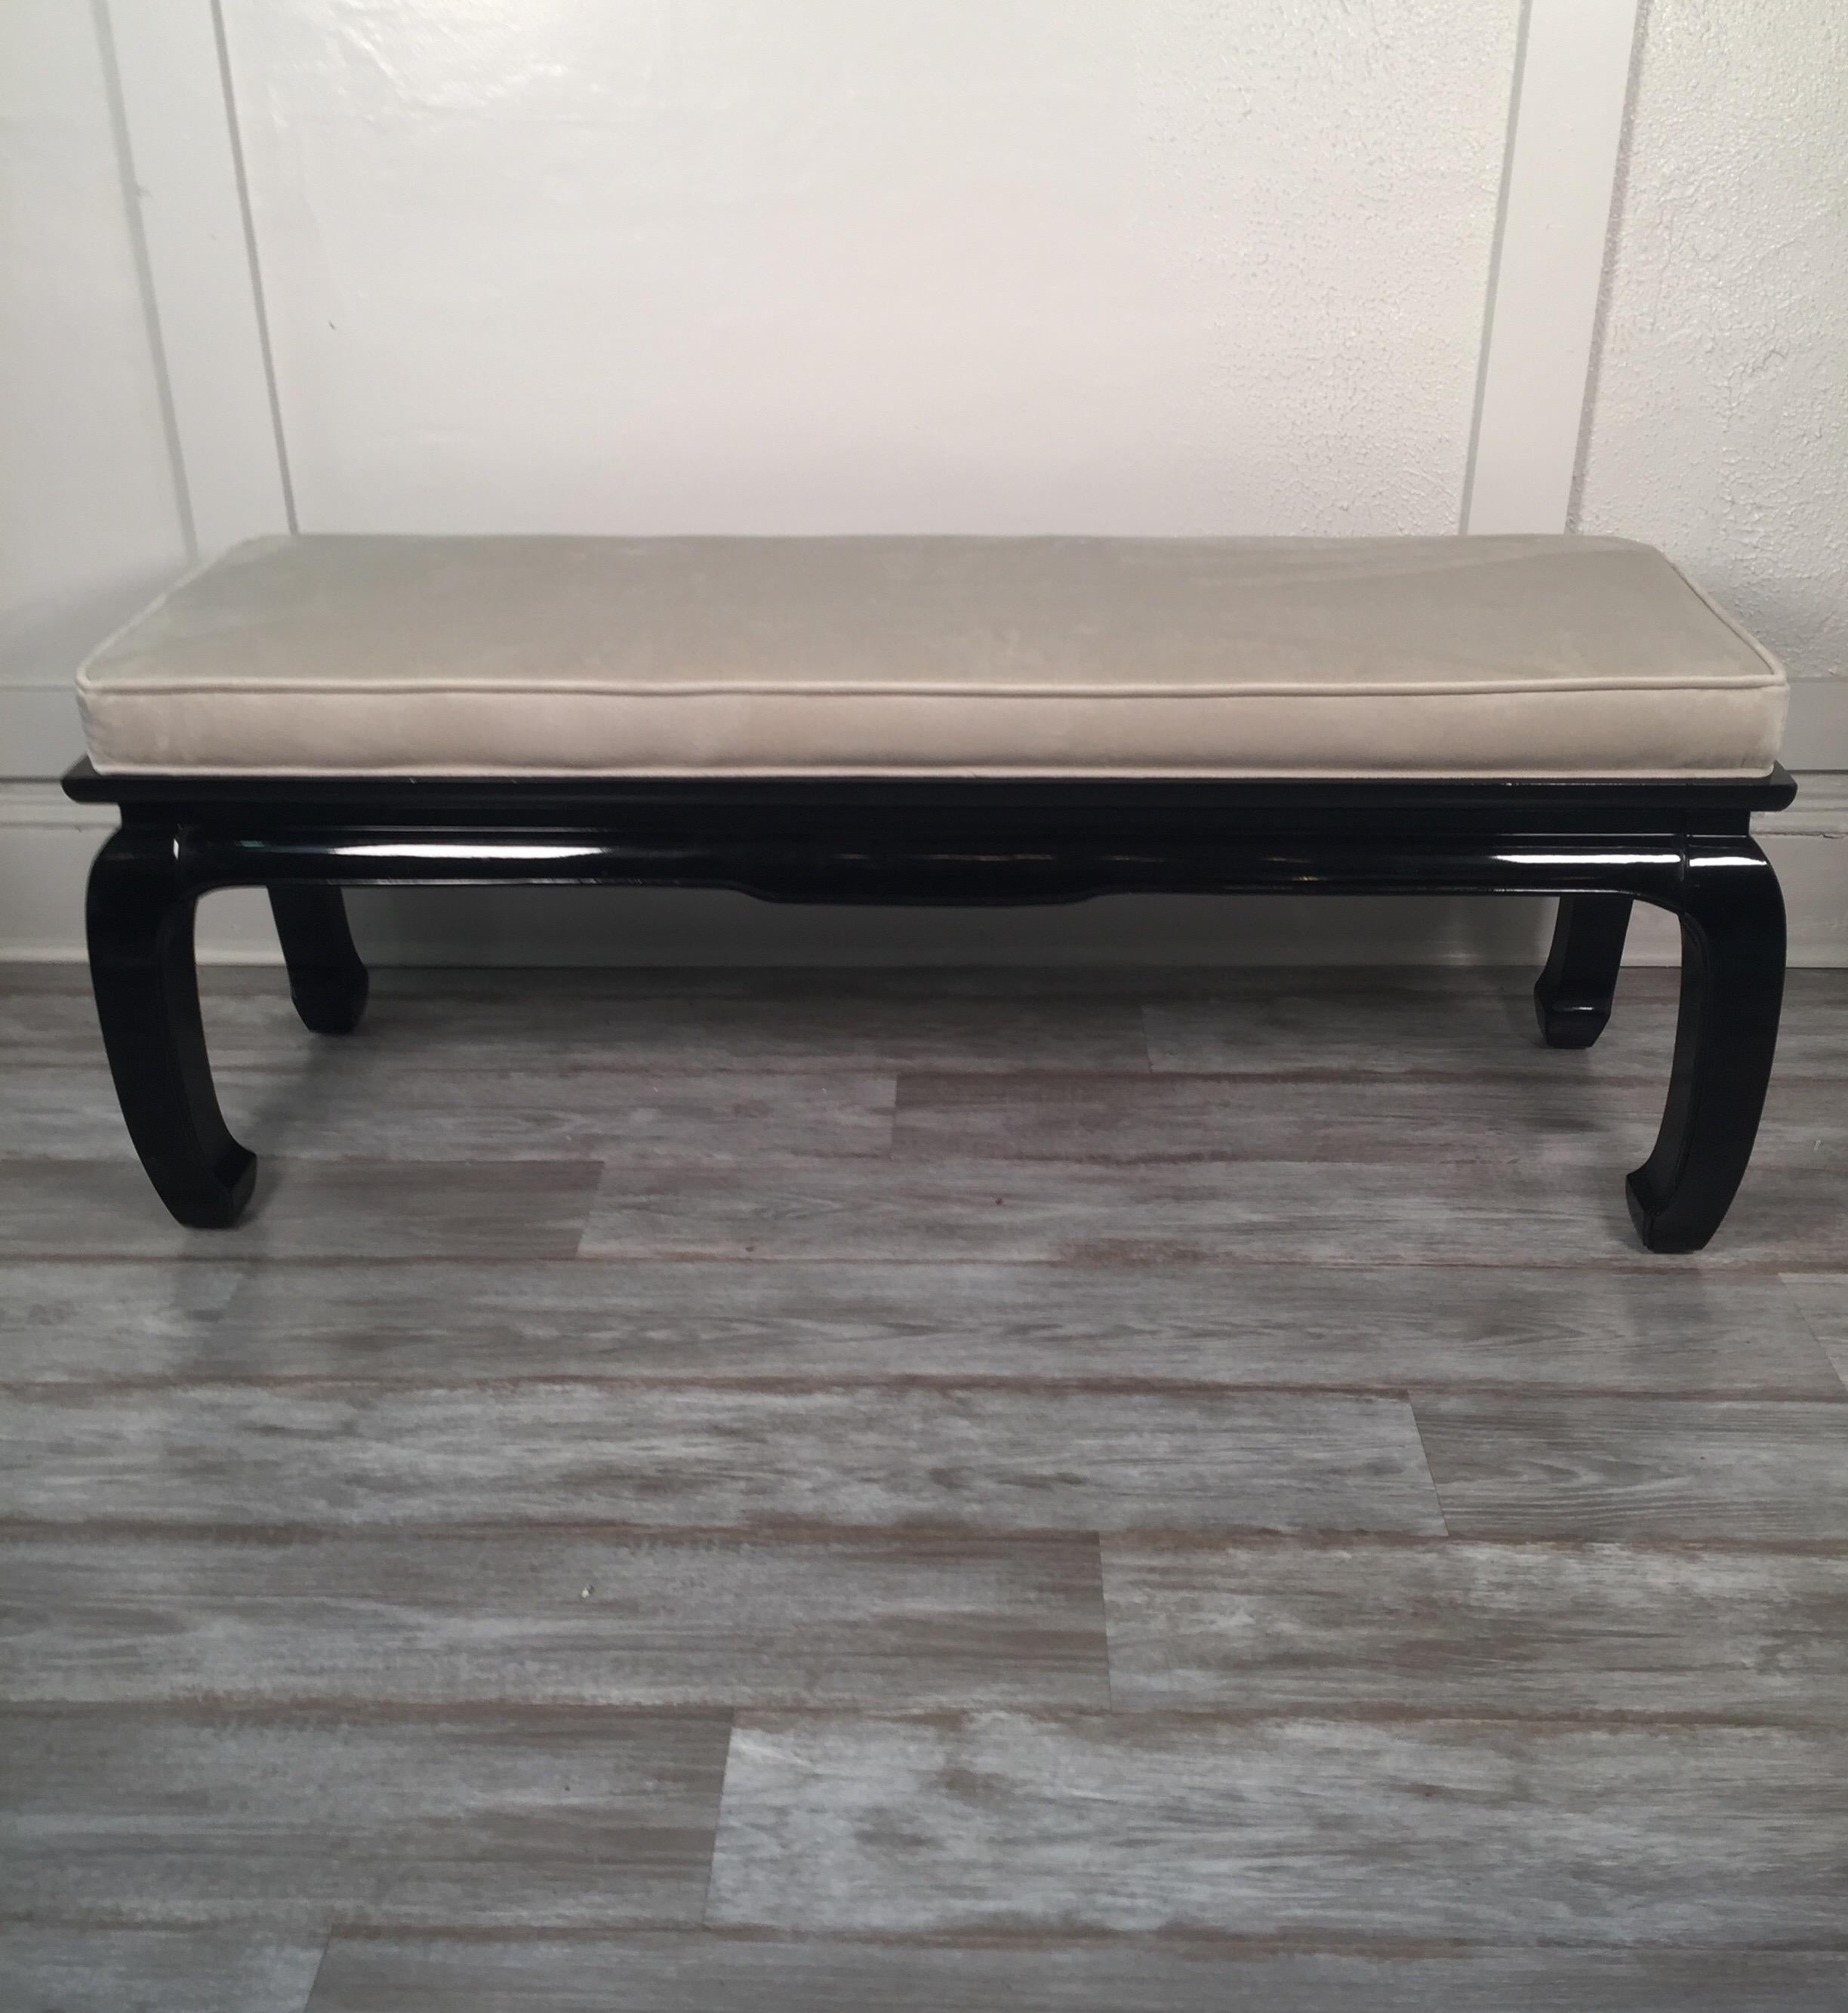 Mid-Century Modern black lacquered Asian style bench newly upholstered
Very good sturdy construction and great condition
Dimensions: 50